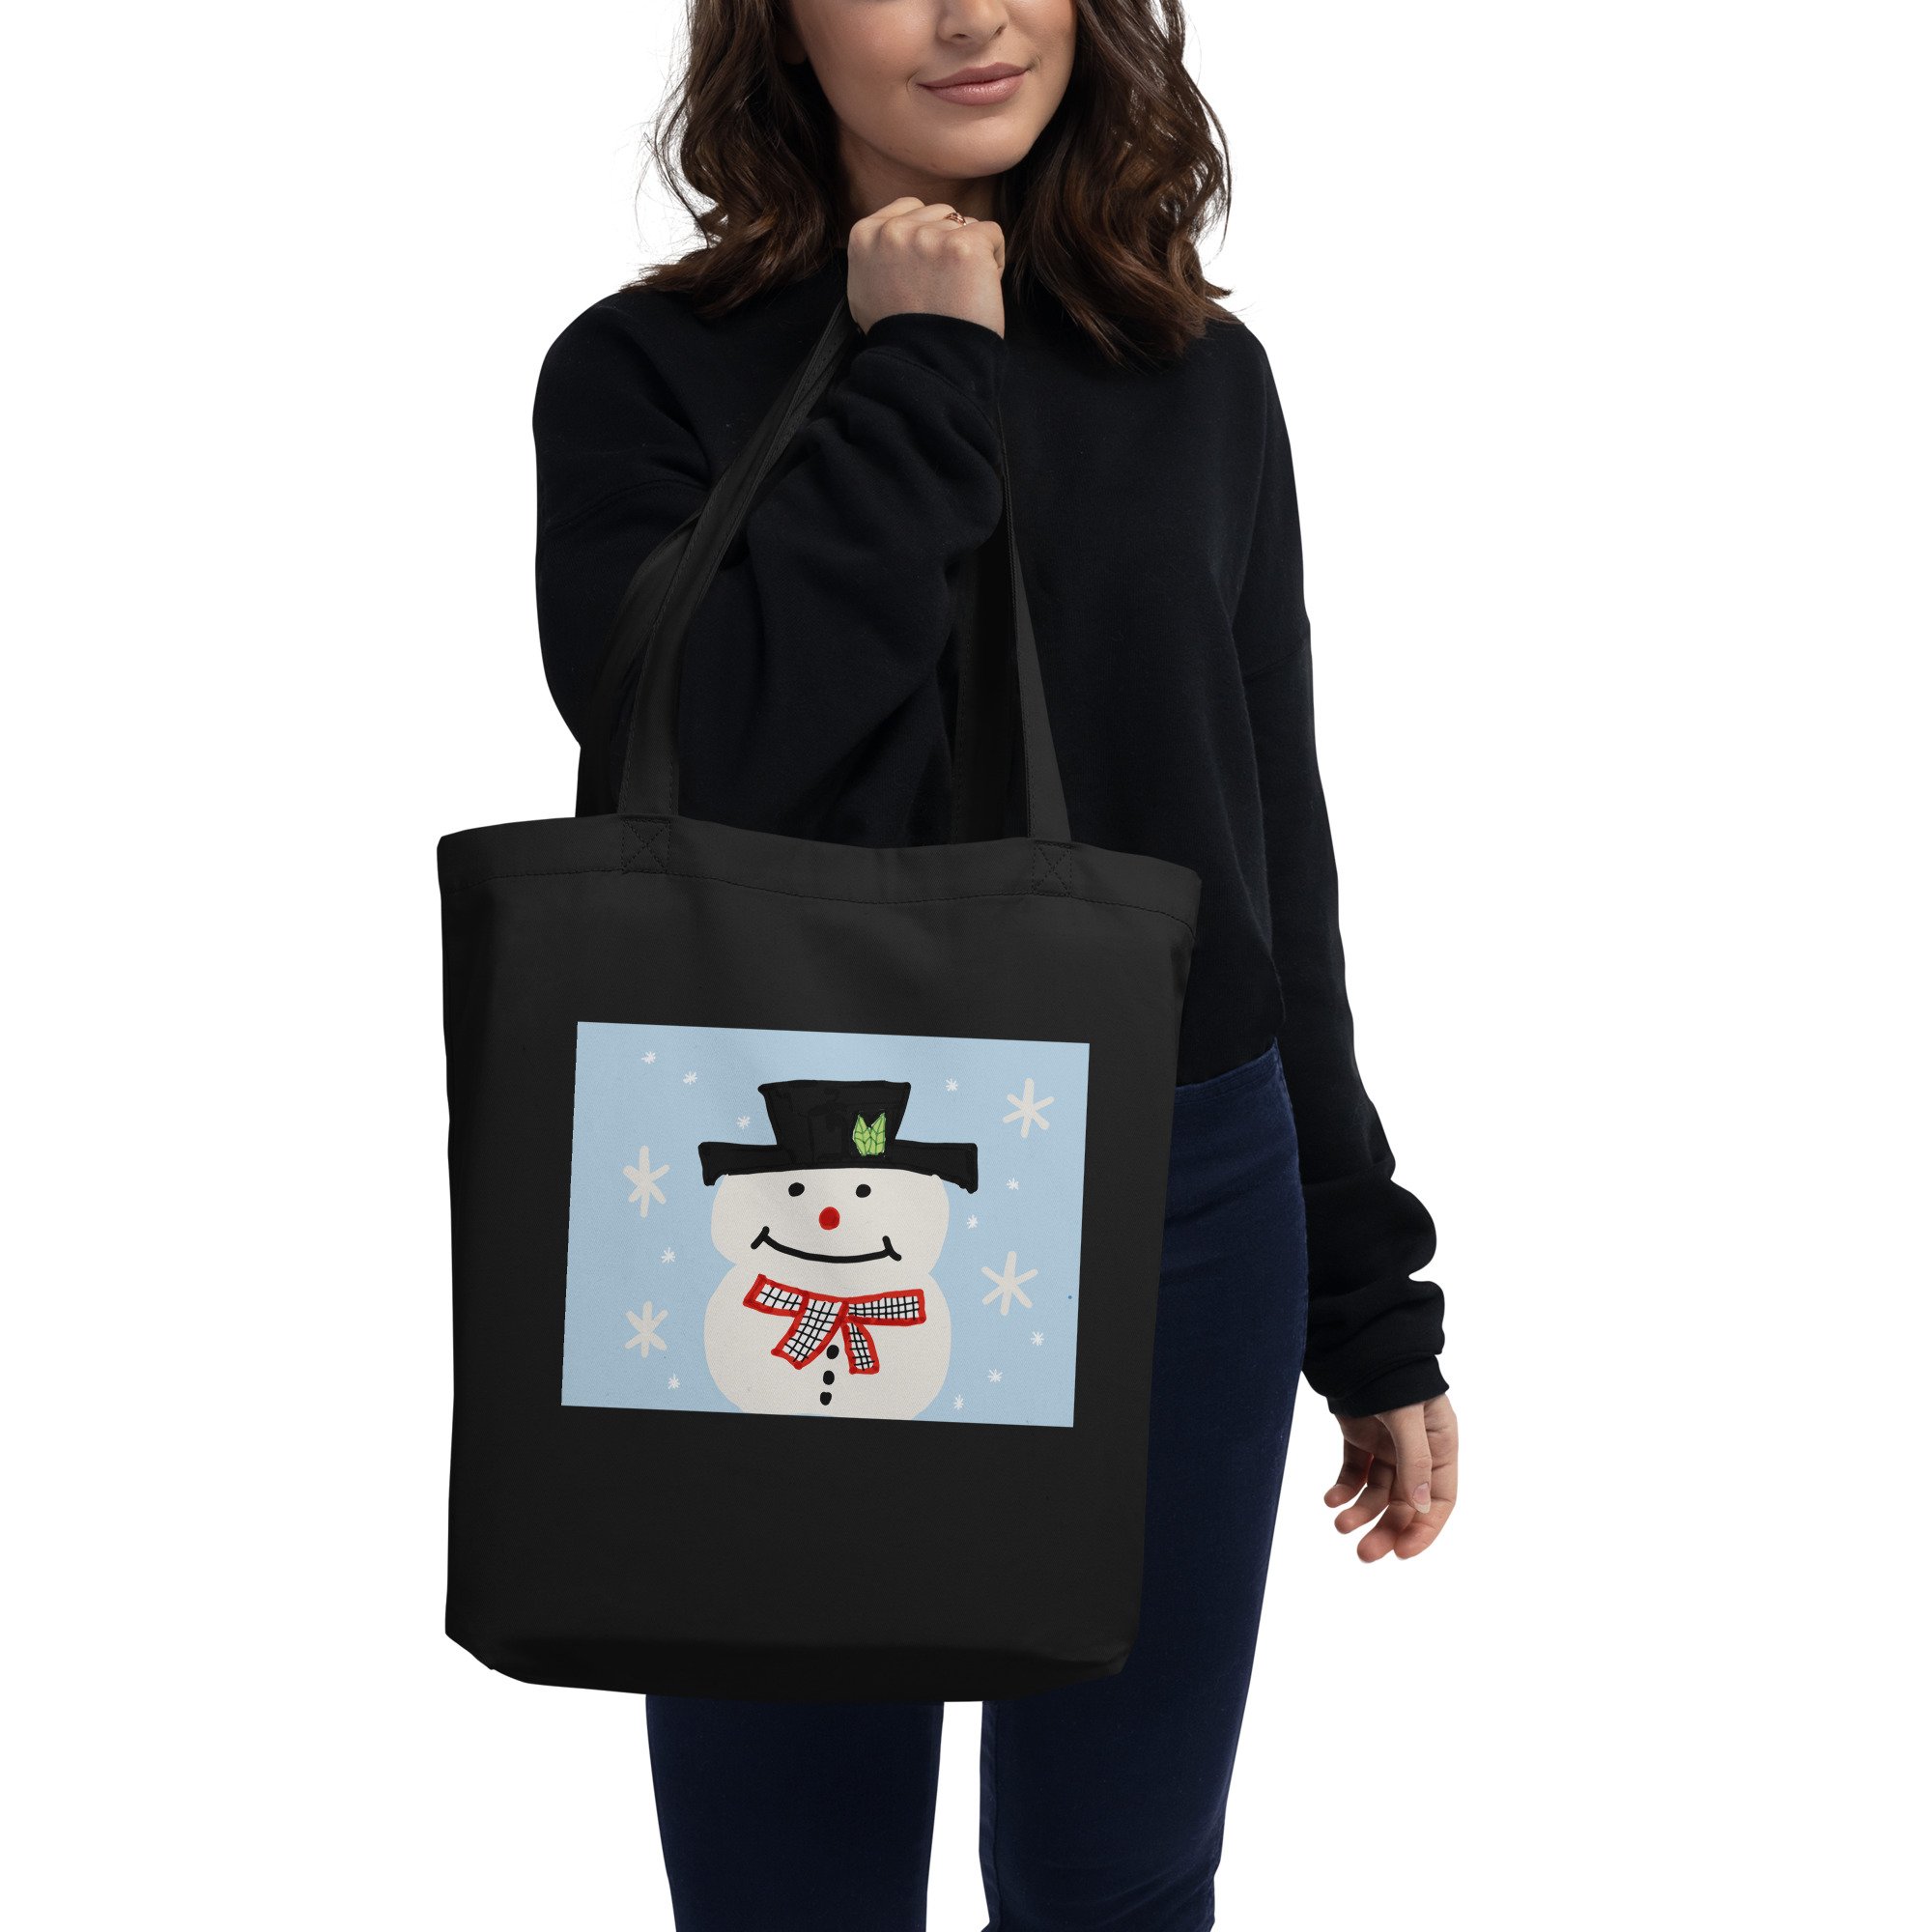 Snowman In The Winter Time by Ada Chan, 2022 Tote Bag